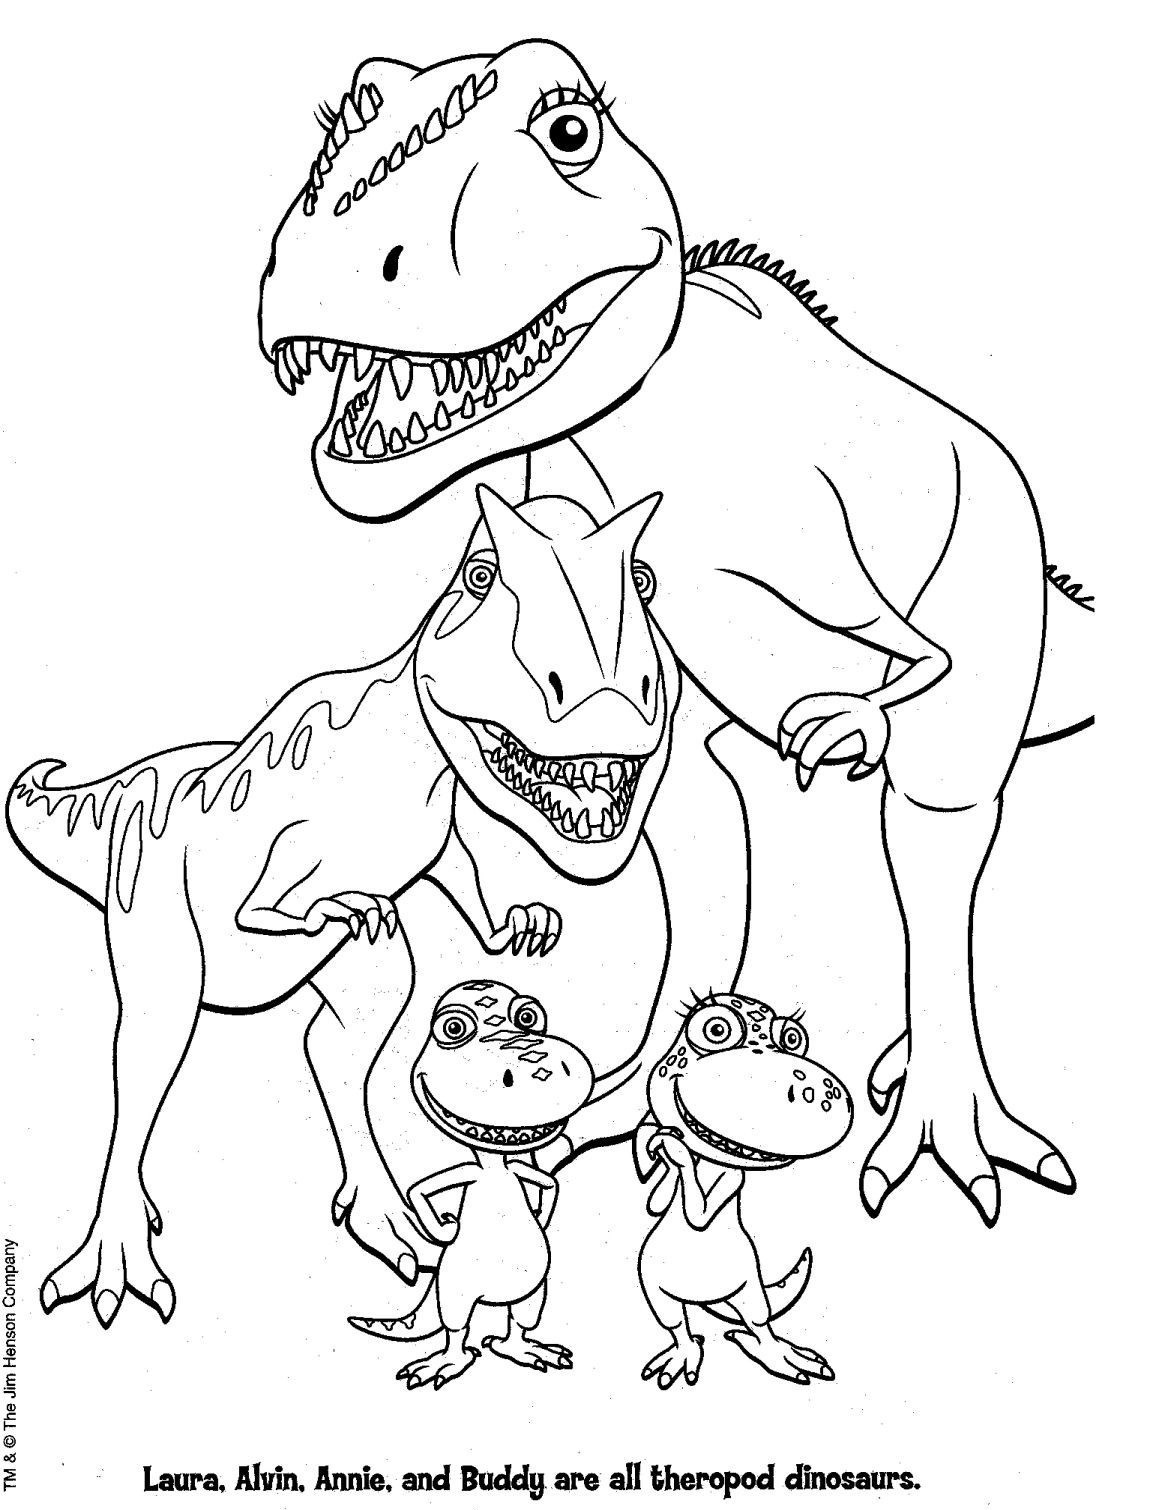 Free Printable Dinosaur Coloring Pages
 Destiny Printable Dinosaurs To Color Easily 5